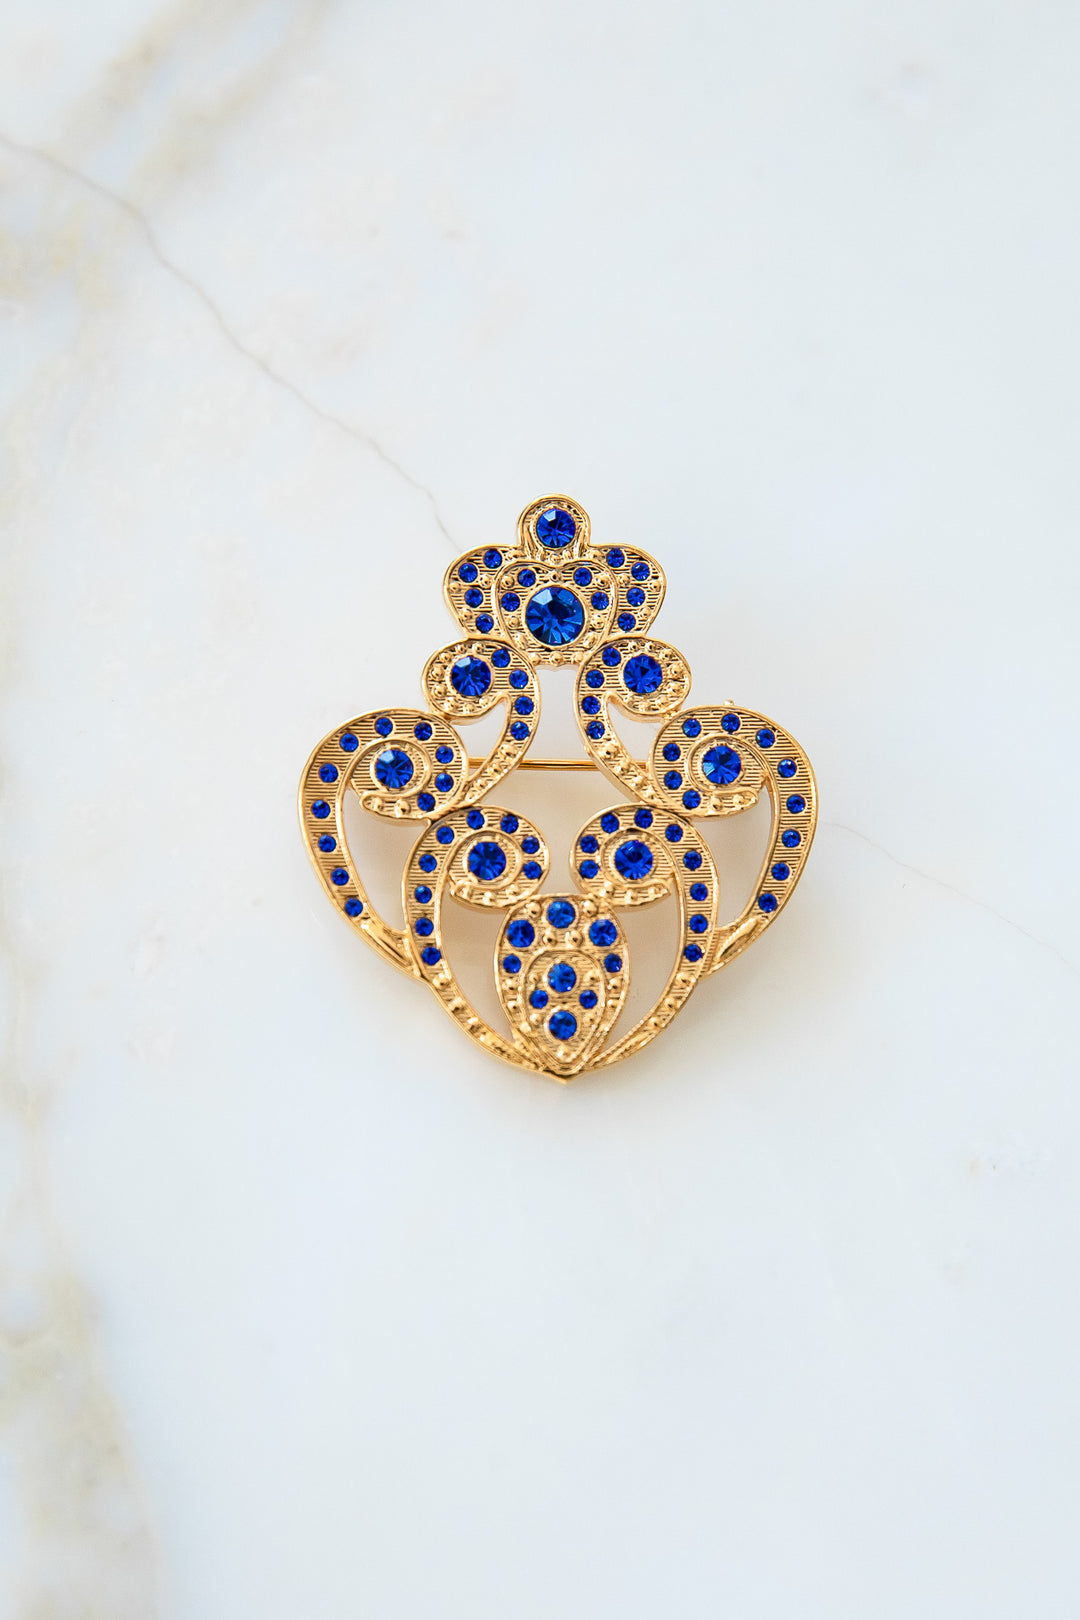 The Crown Brooch - Gold With Saphire Crystals